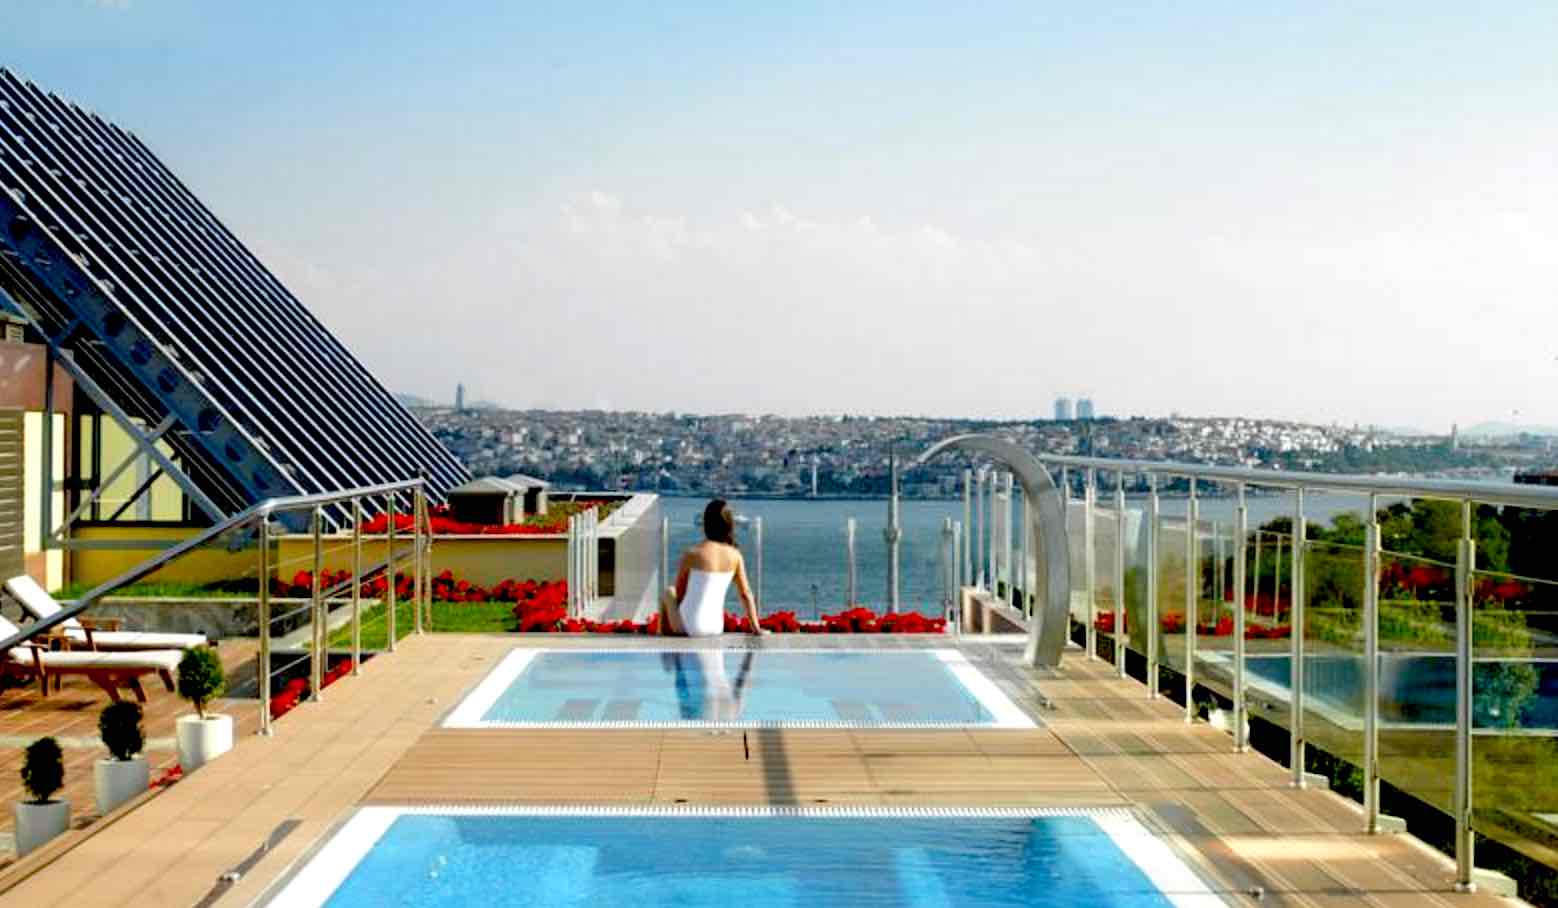 istanbul hotels with best hotel views the most perfect view